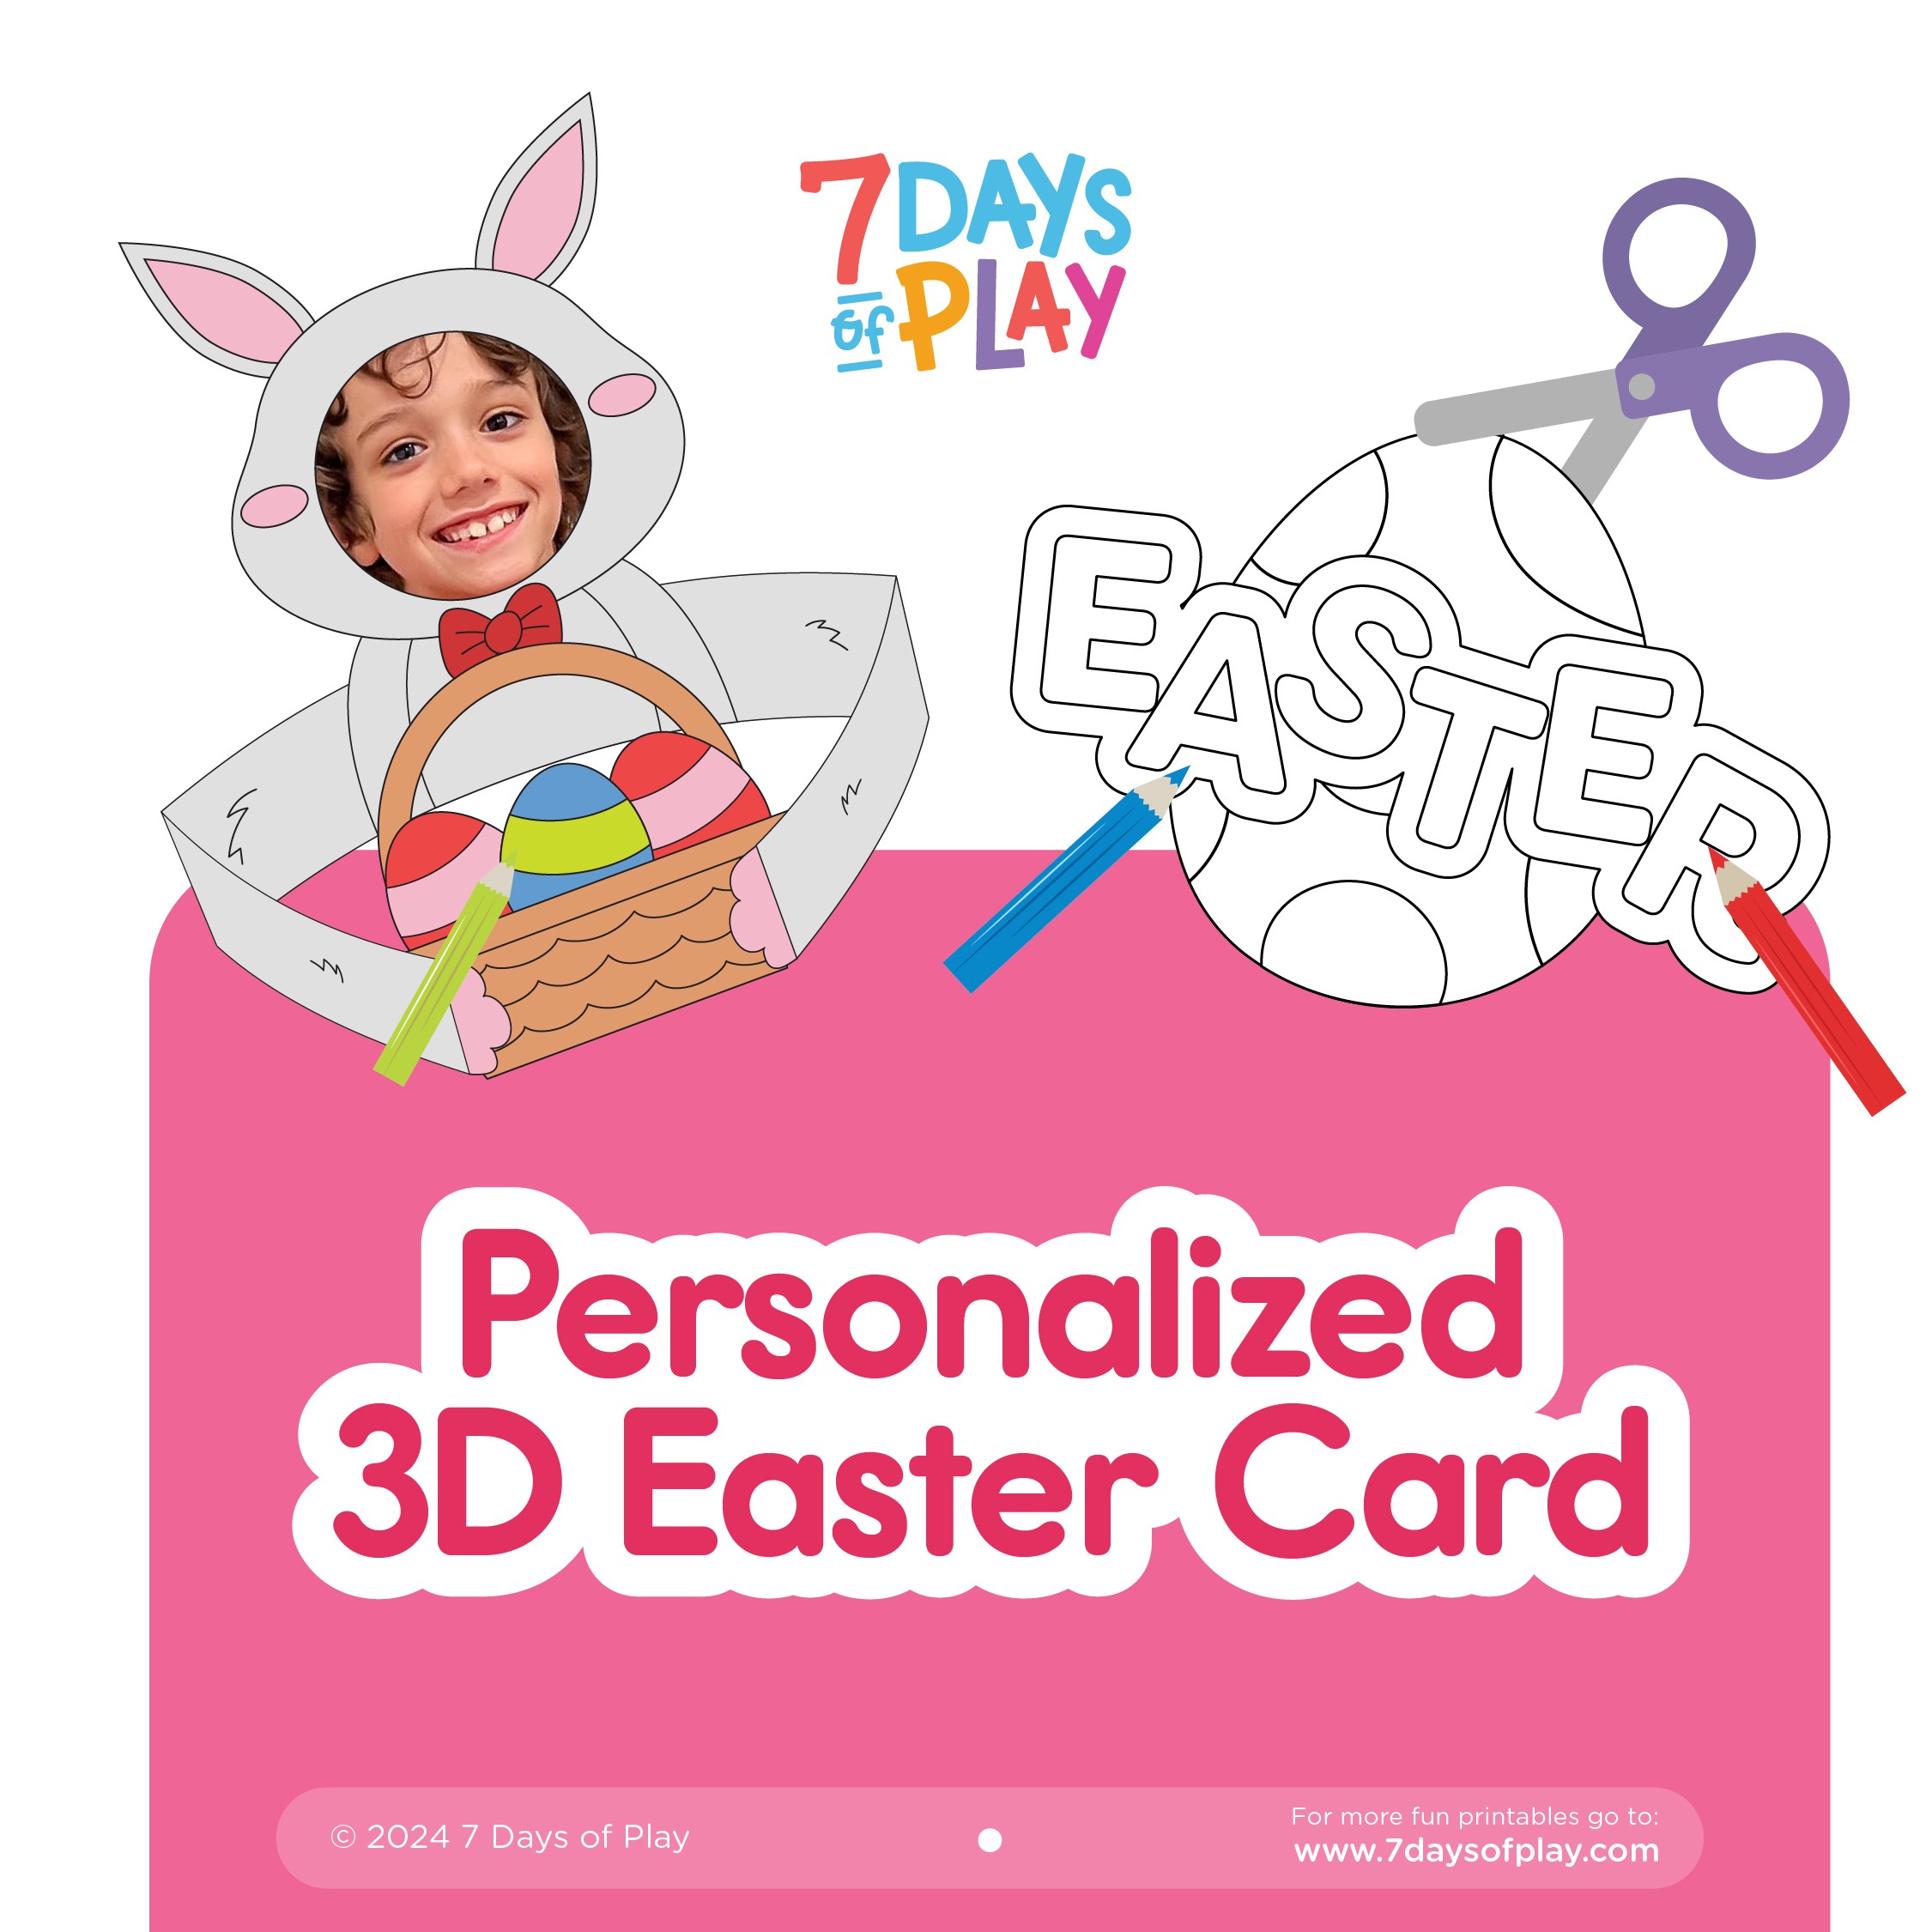 personalized 3D Easter Card